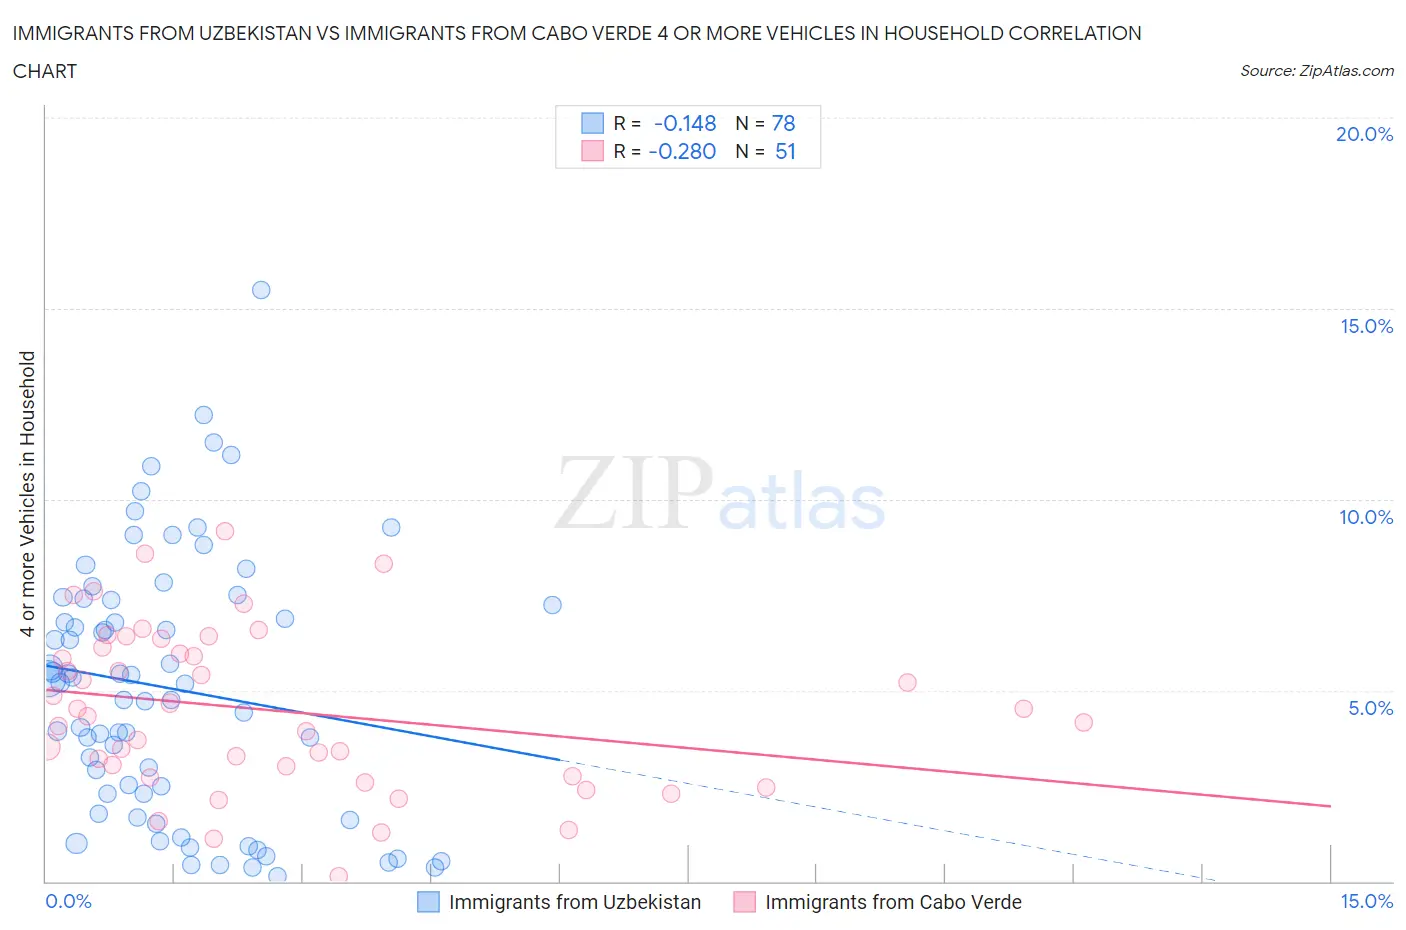 Immigrants from Uzbekistan vs Immigrants from Cabo Verde 4 or more Vehicles in Household